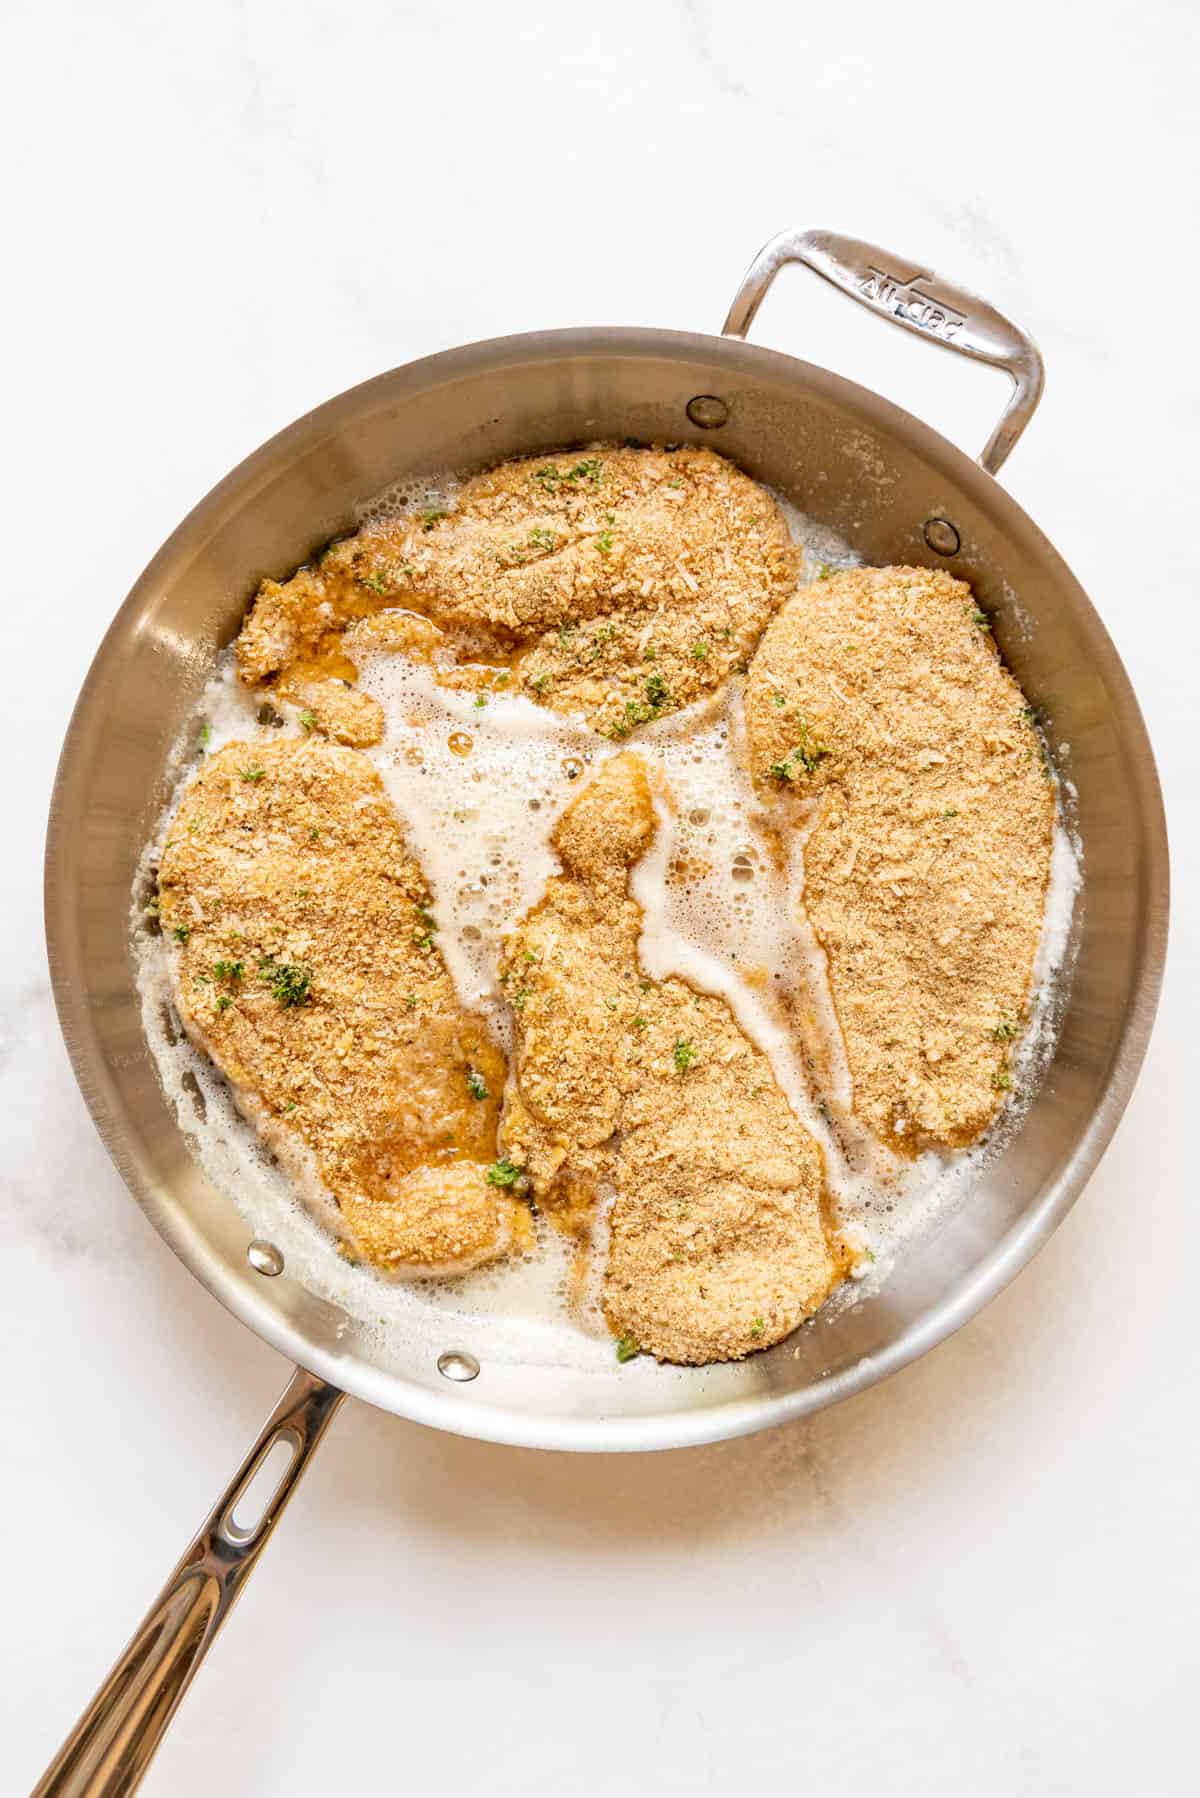 Pan frying breaded chicken breasts for chicken parmesan.